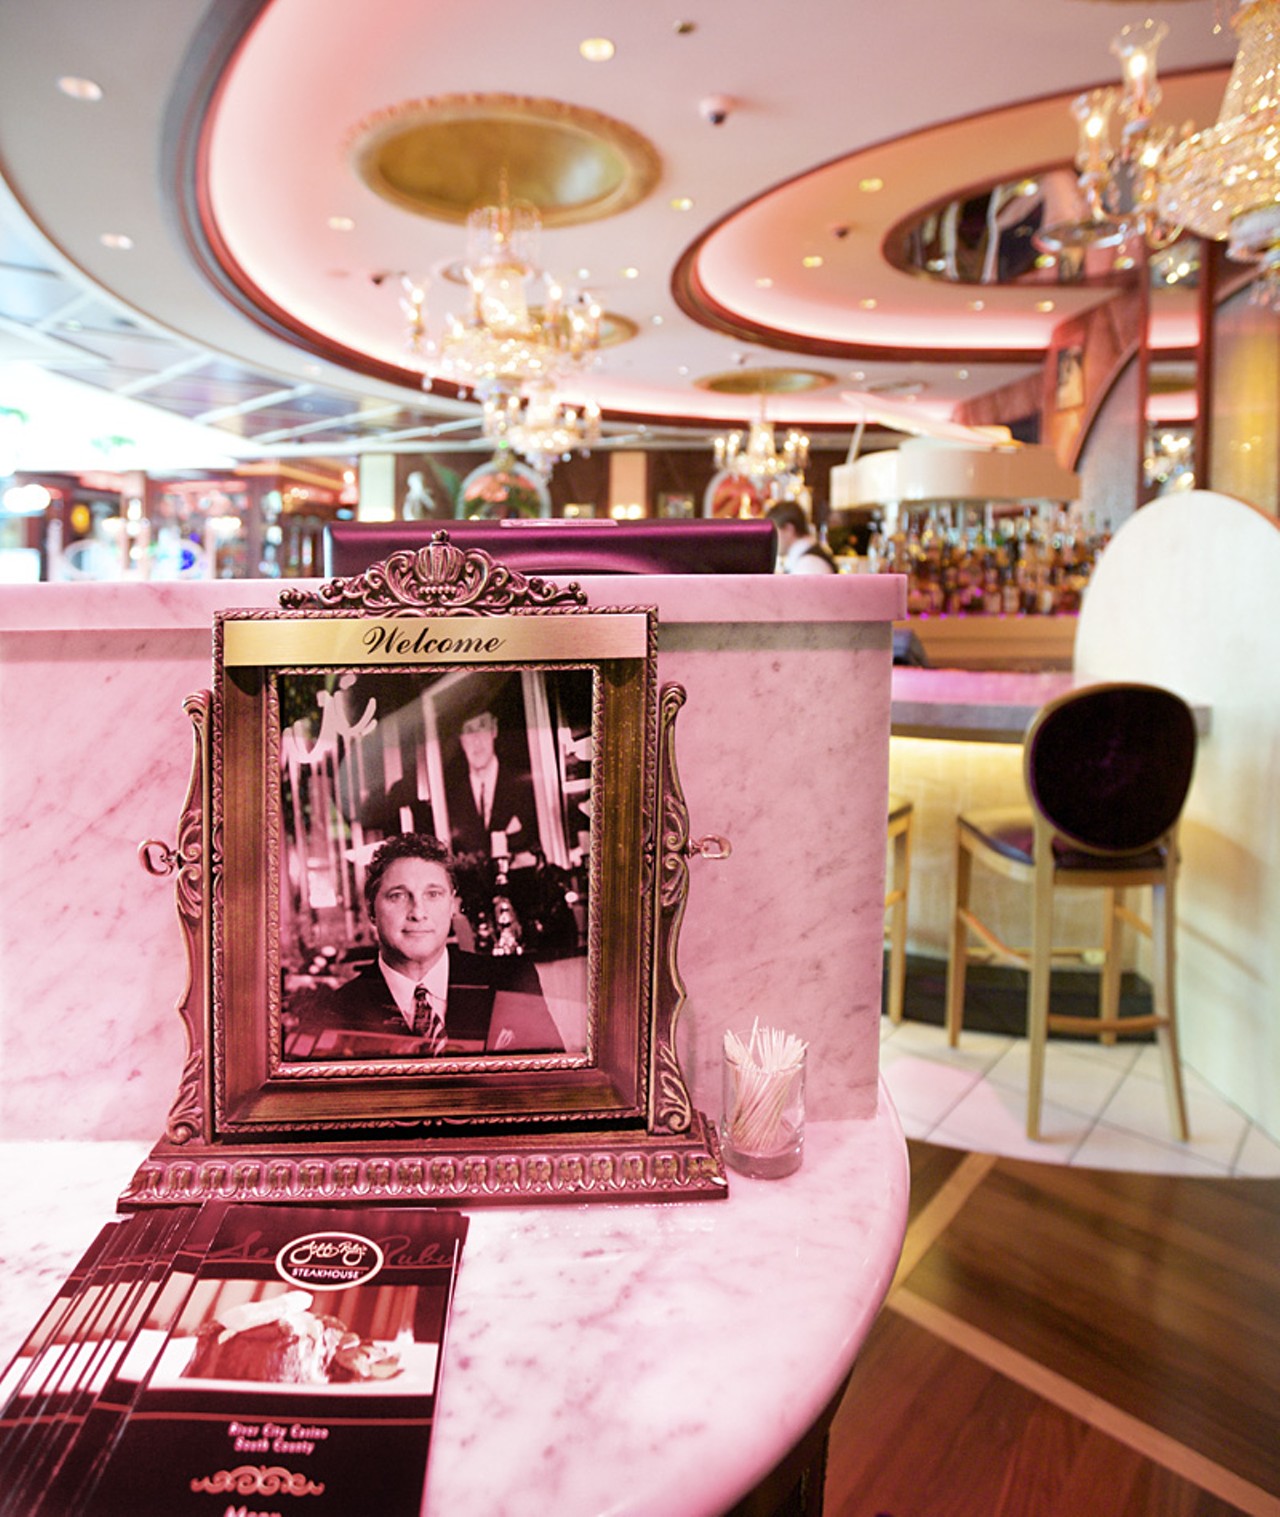 While Jeff Ruby's is headquartered in Cincinnati, a picture of the restaurant's founder and owner sits on the ma&icirc;tre d' stand to greet you as you enter.